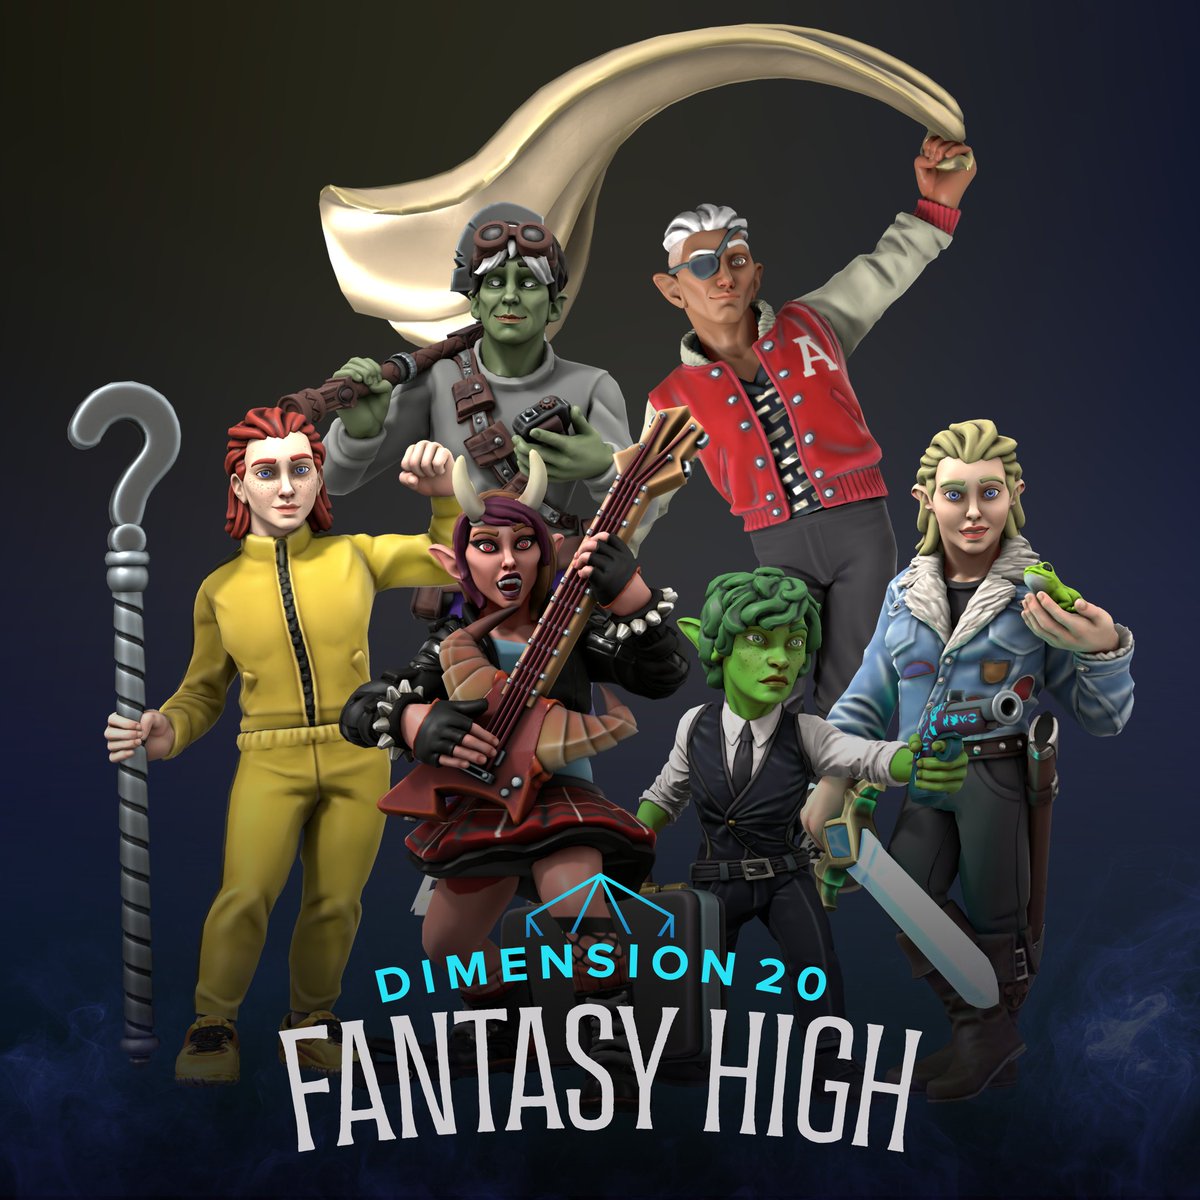 HOOT! GROWL! Our pals at @HeroForgeMinis have added a number of Fantasy High-inspired items to help you recreate the Bad Kids yourselves, or to help make your own Aguefort Adventuring Academy student! ⚔️ heroforge.com/fantasyhigh